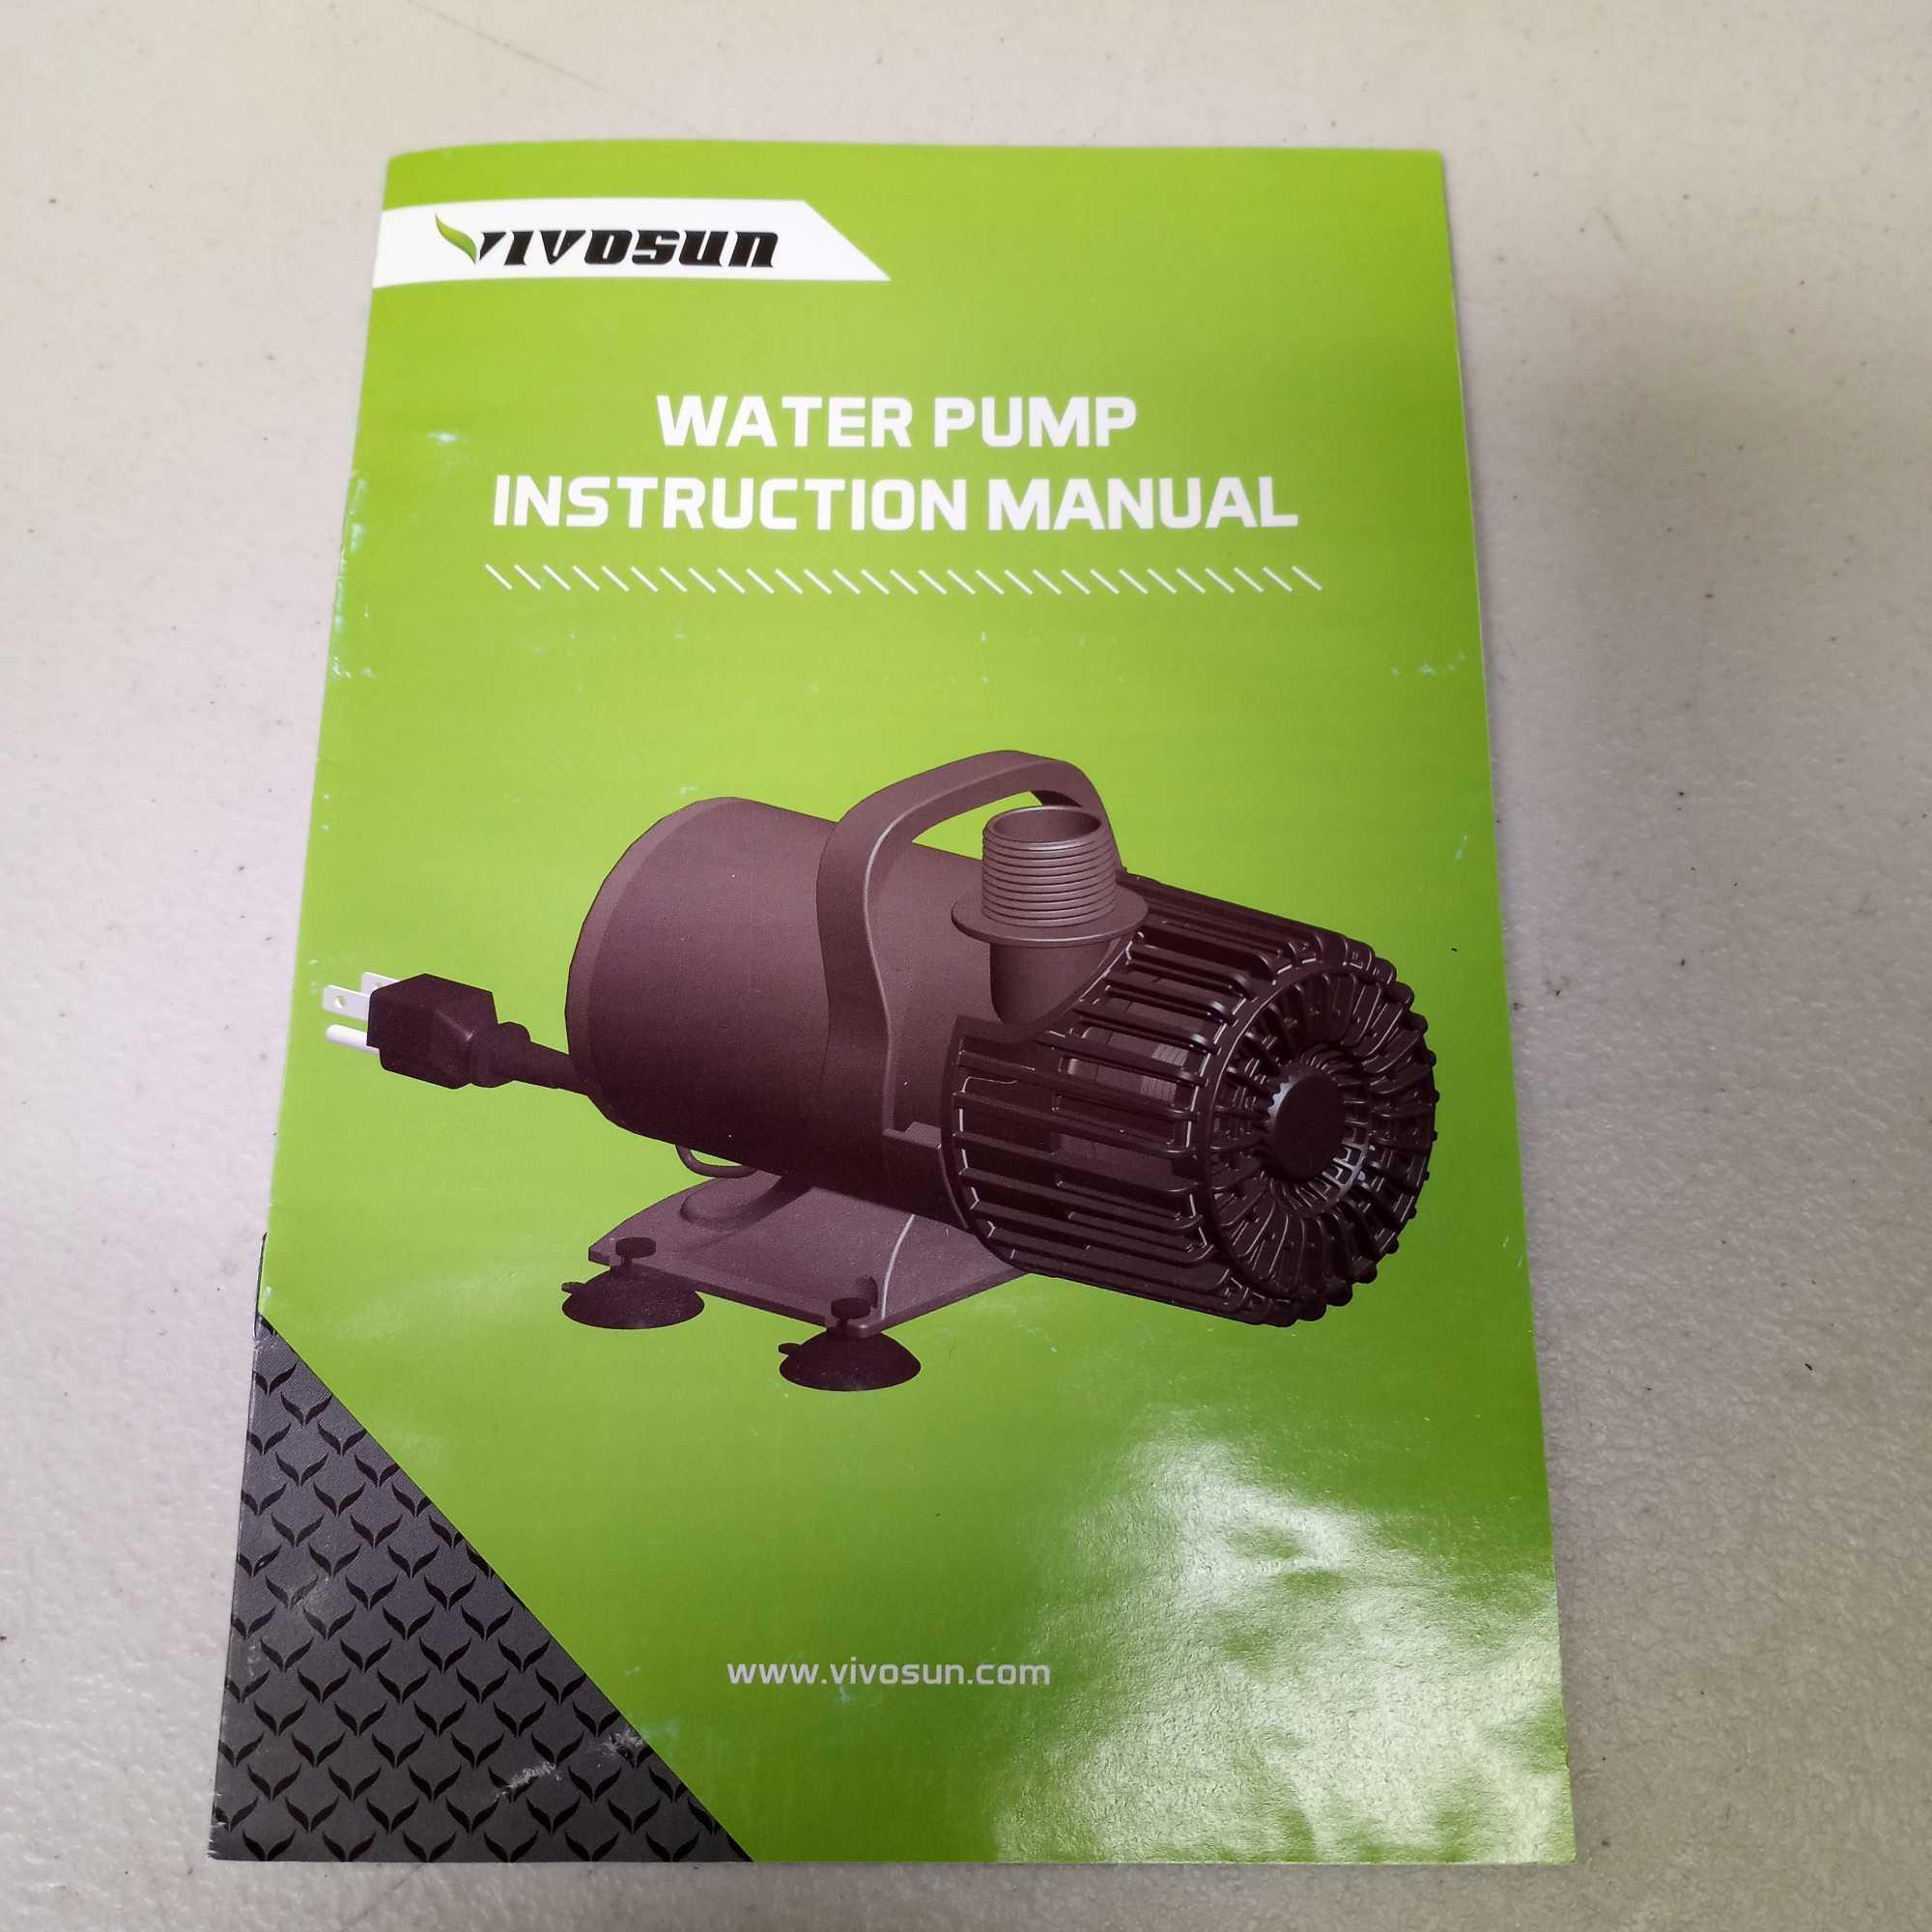 VIVOHOME Electric 100W 1600GPH Submersible WaterPump for Koi Pond PoolWaterfall Fountains $79.99MSRP